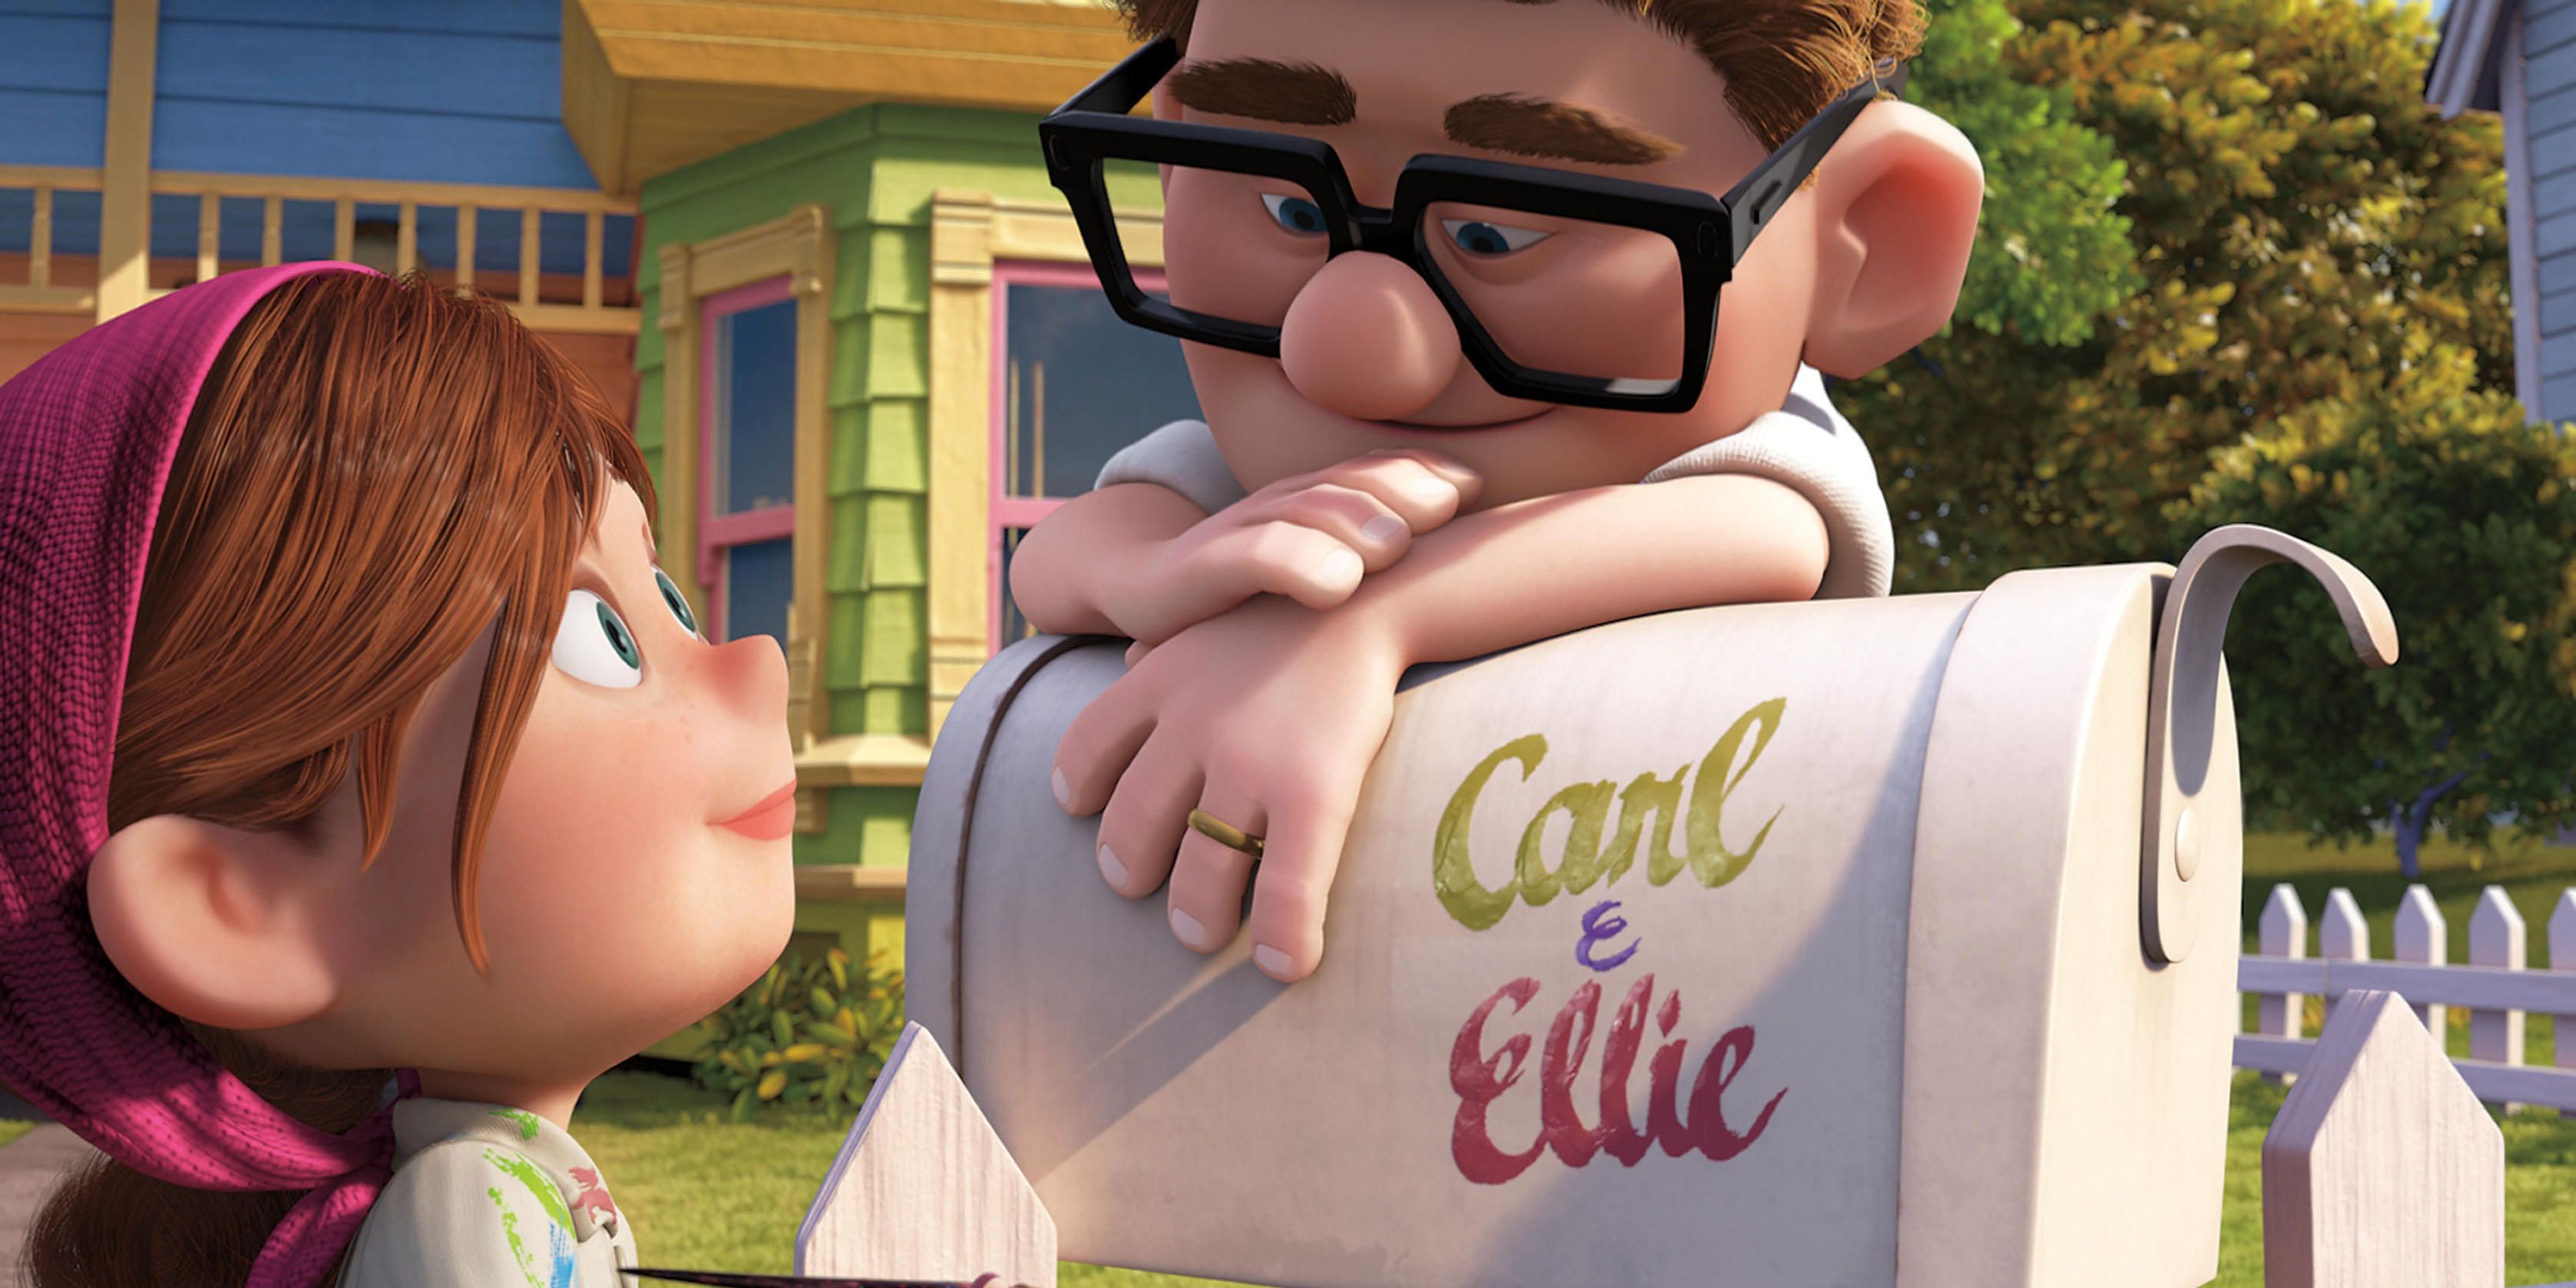 Carl (Ed Asner) and Ellie at their mailbox in 'Up' (2009)